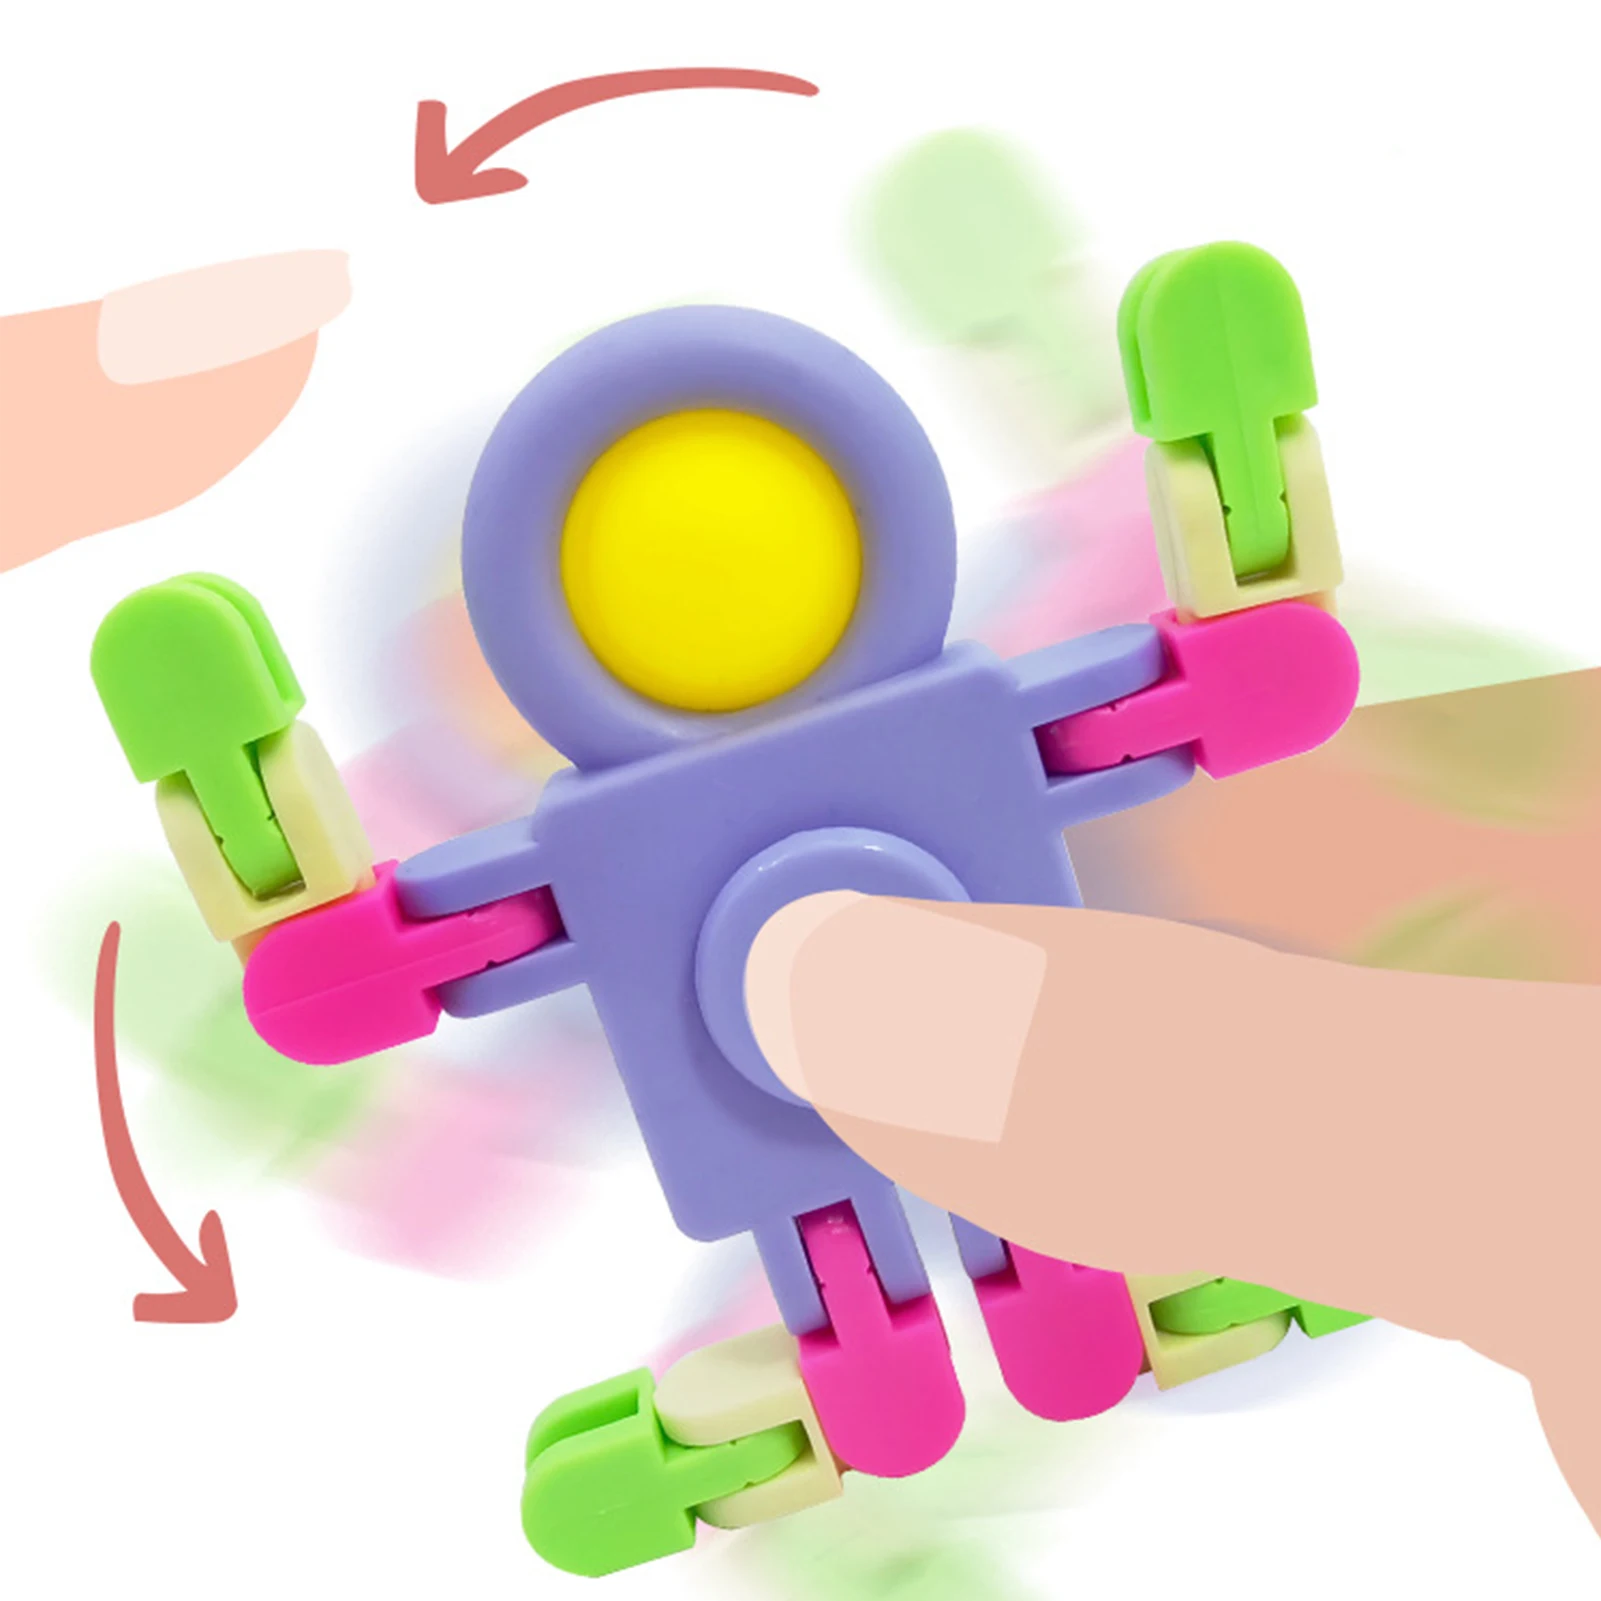 

Spaceman Fingertip Spinner Finger Hand Spinning Focus Toy With Transformable Chain Fingertip Gyro Stress Relief For Kids Adults